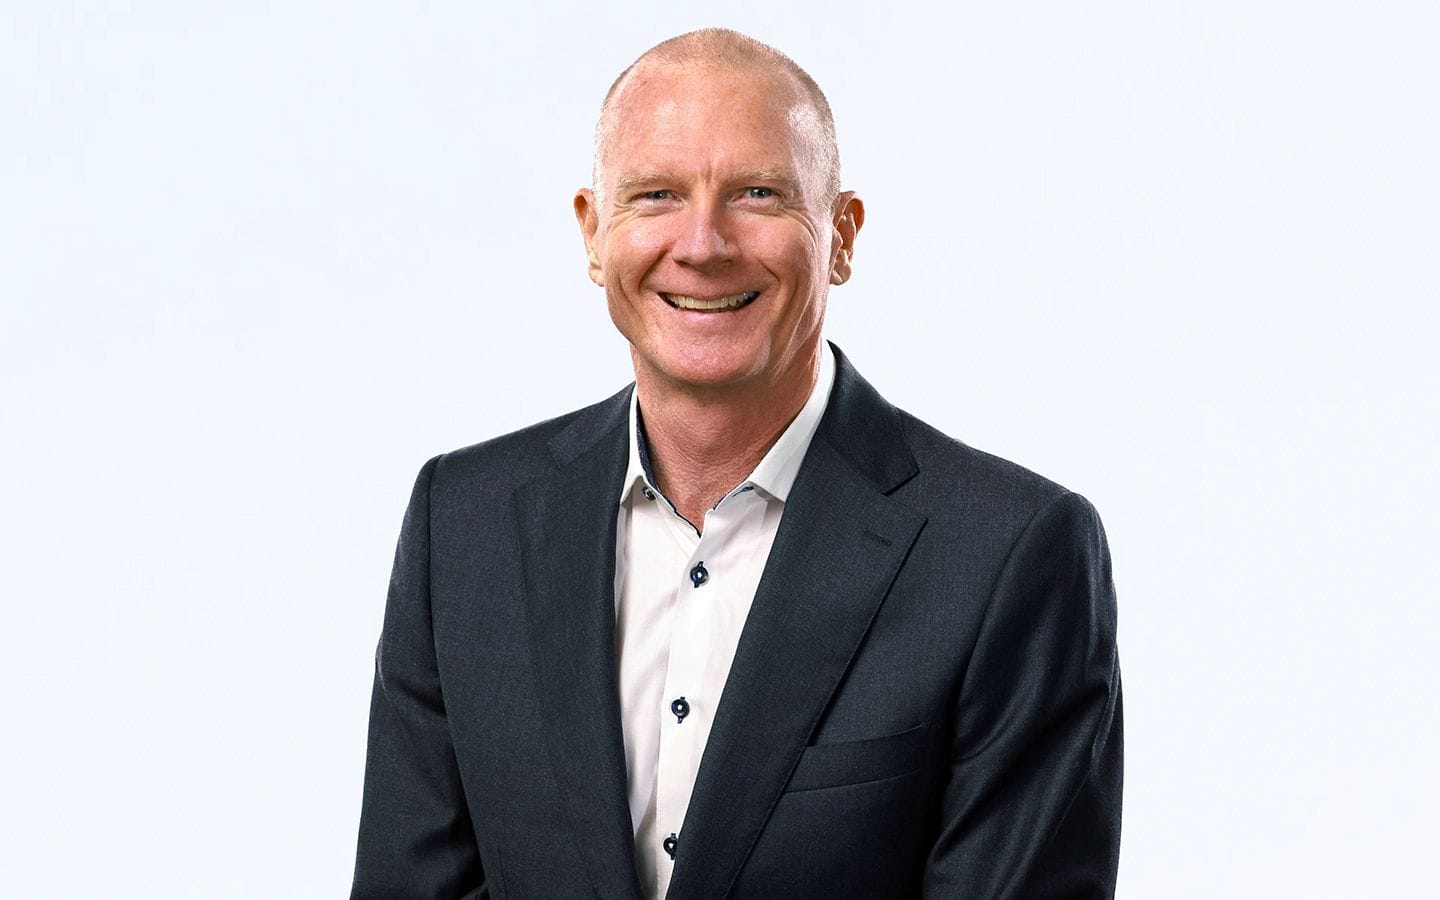 Cochlear CEO Dig Howitt